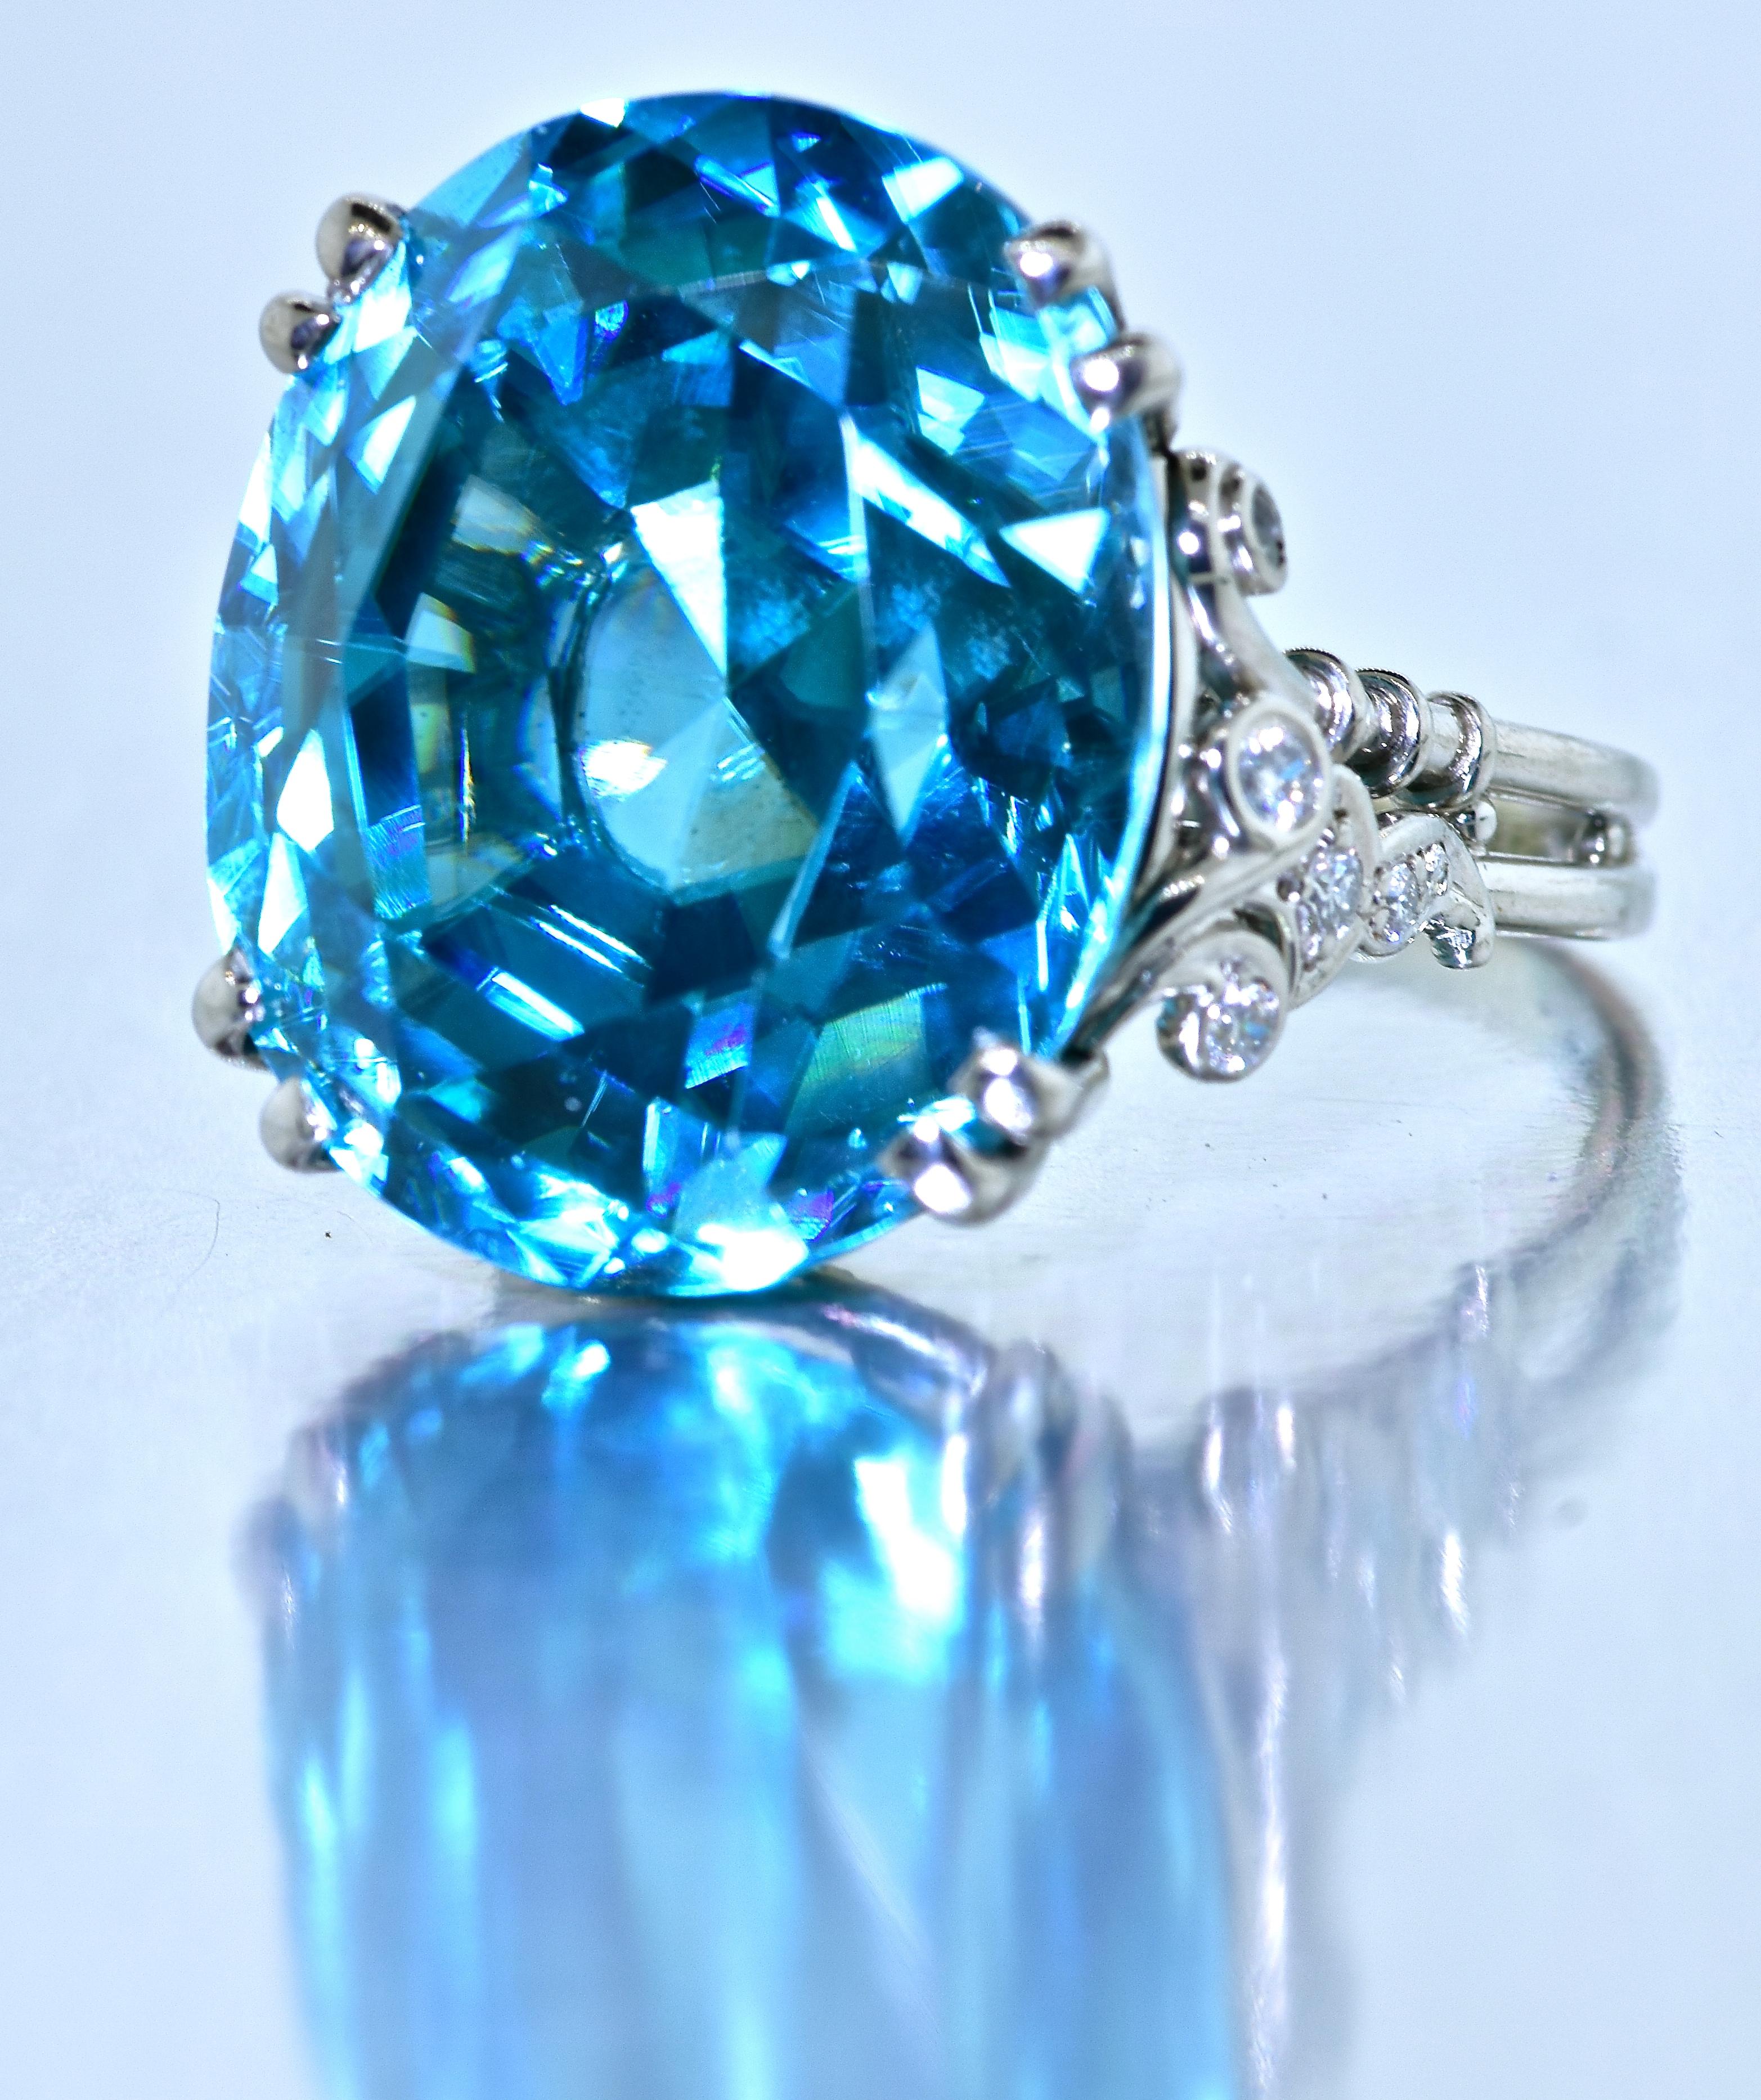 Intense blue natural blue Zircon weighing 32.09 cts. Natural blue zircons are very rare above 15 cts., and very hard to locate.   This center stone is collection quality because, not only its unusually large size, but also its intense pure blue